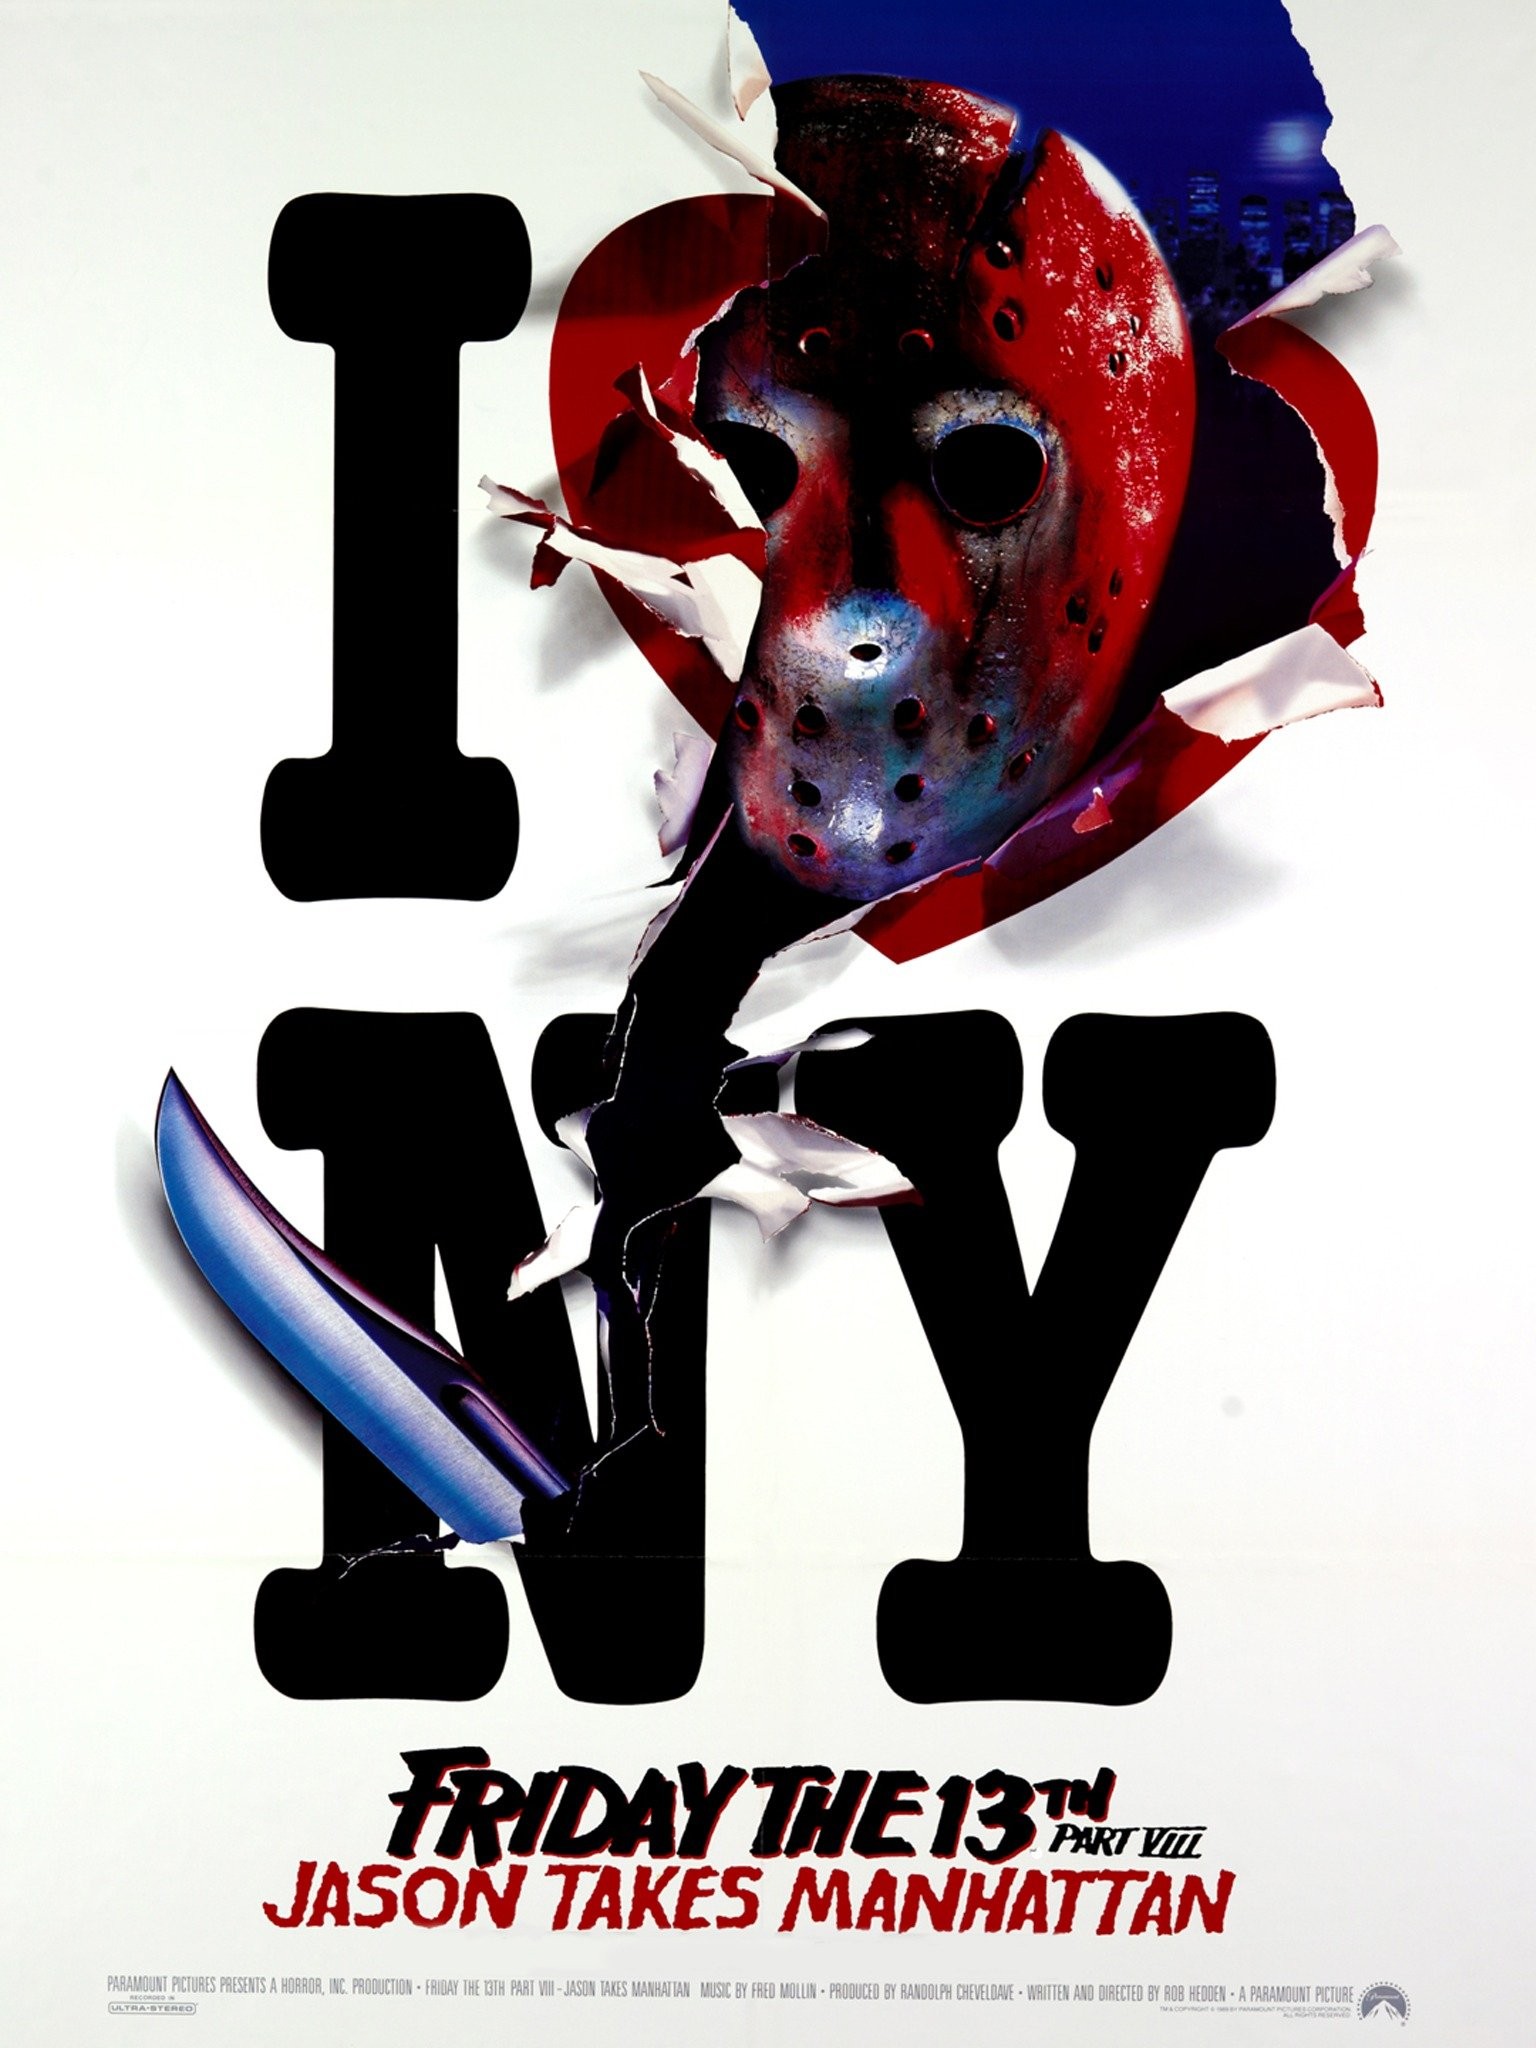 The Sort-Of True Story of Friday the 13th